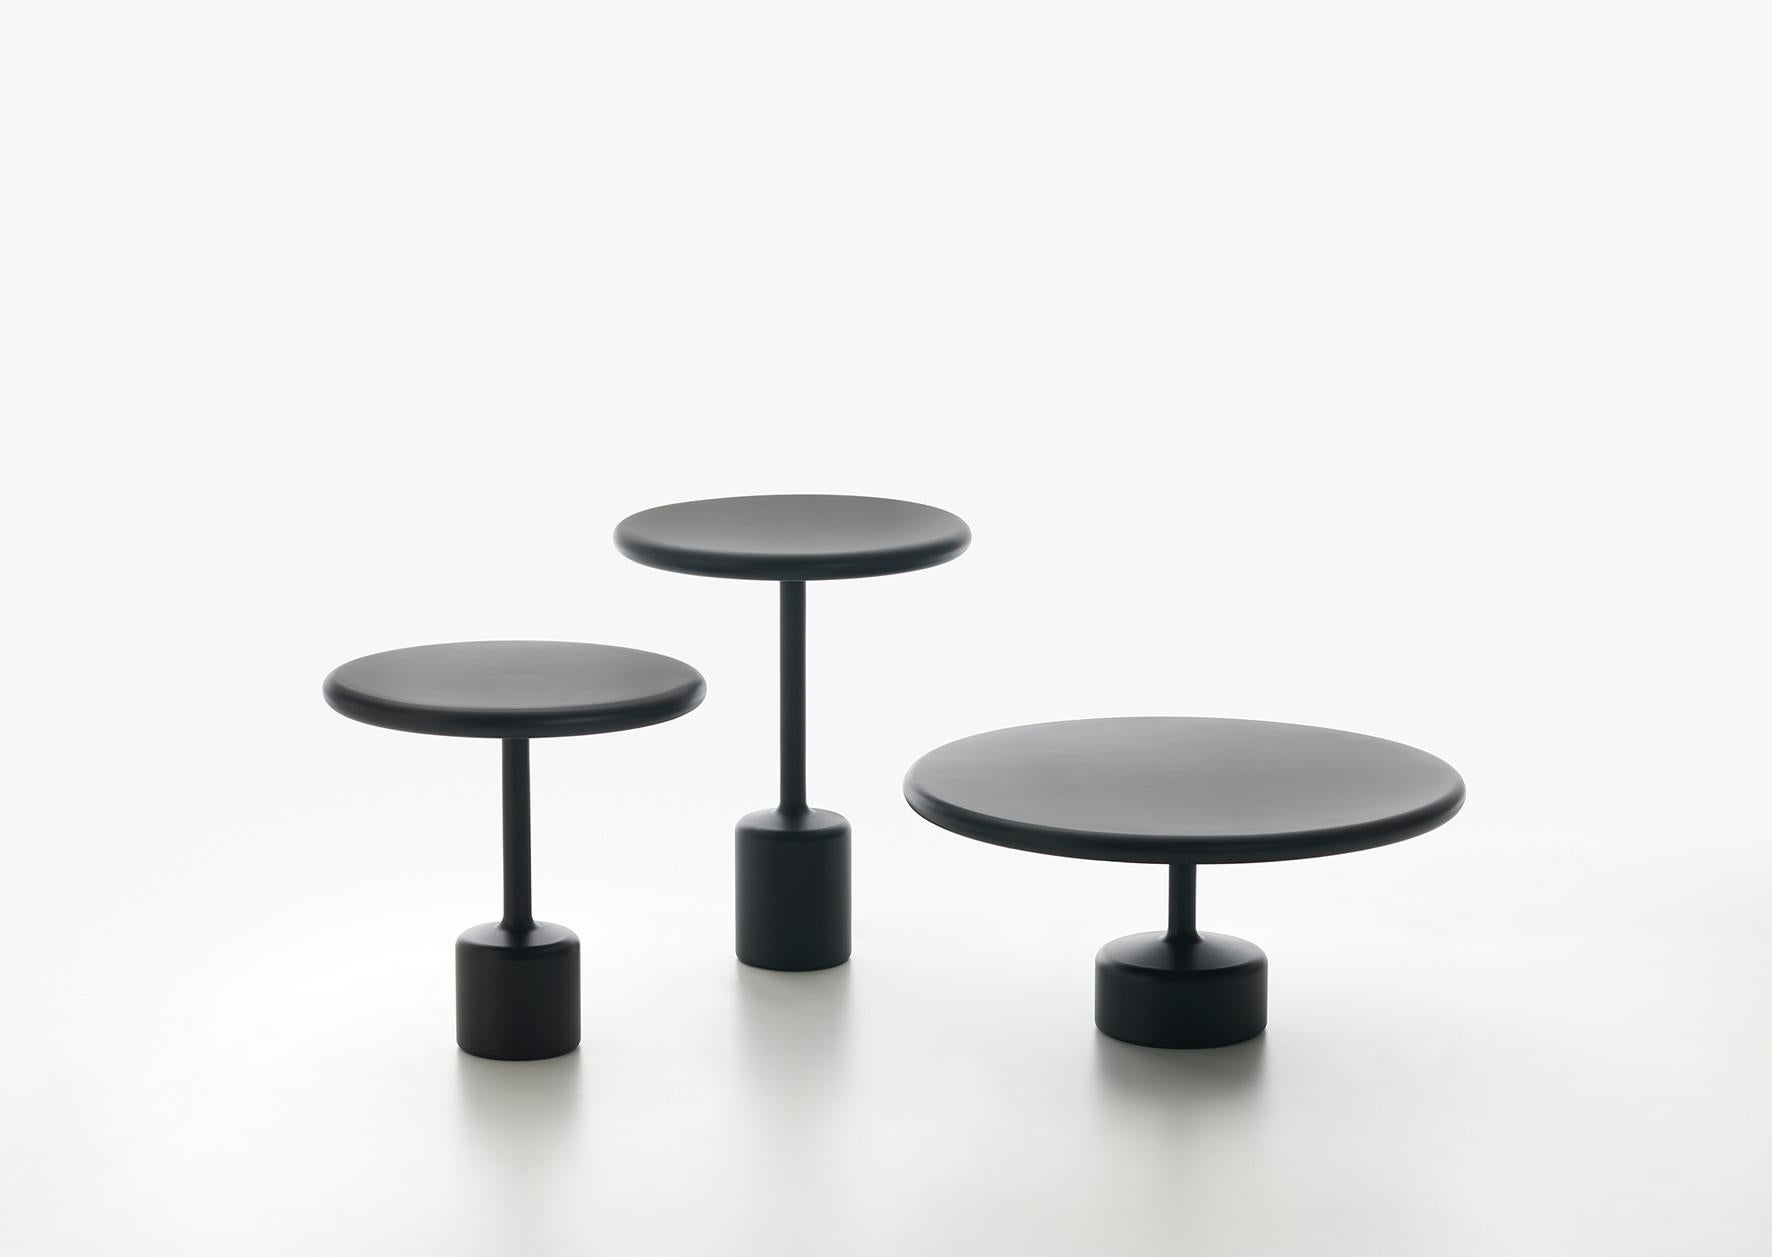 Tavolotto is a set of 3 tables - same look, different proportions. Dide table, center low table, accessory table. Tavolotto appears monolithic, almost as if it were made of a single block, though it is not. It is welded, then polished so perfectly